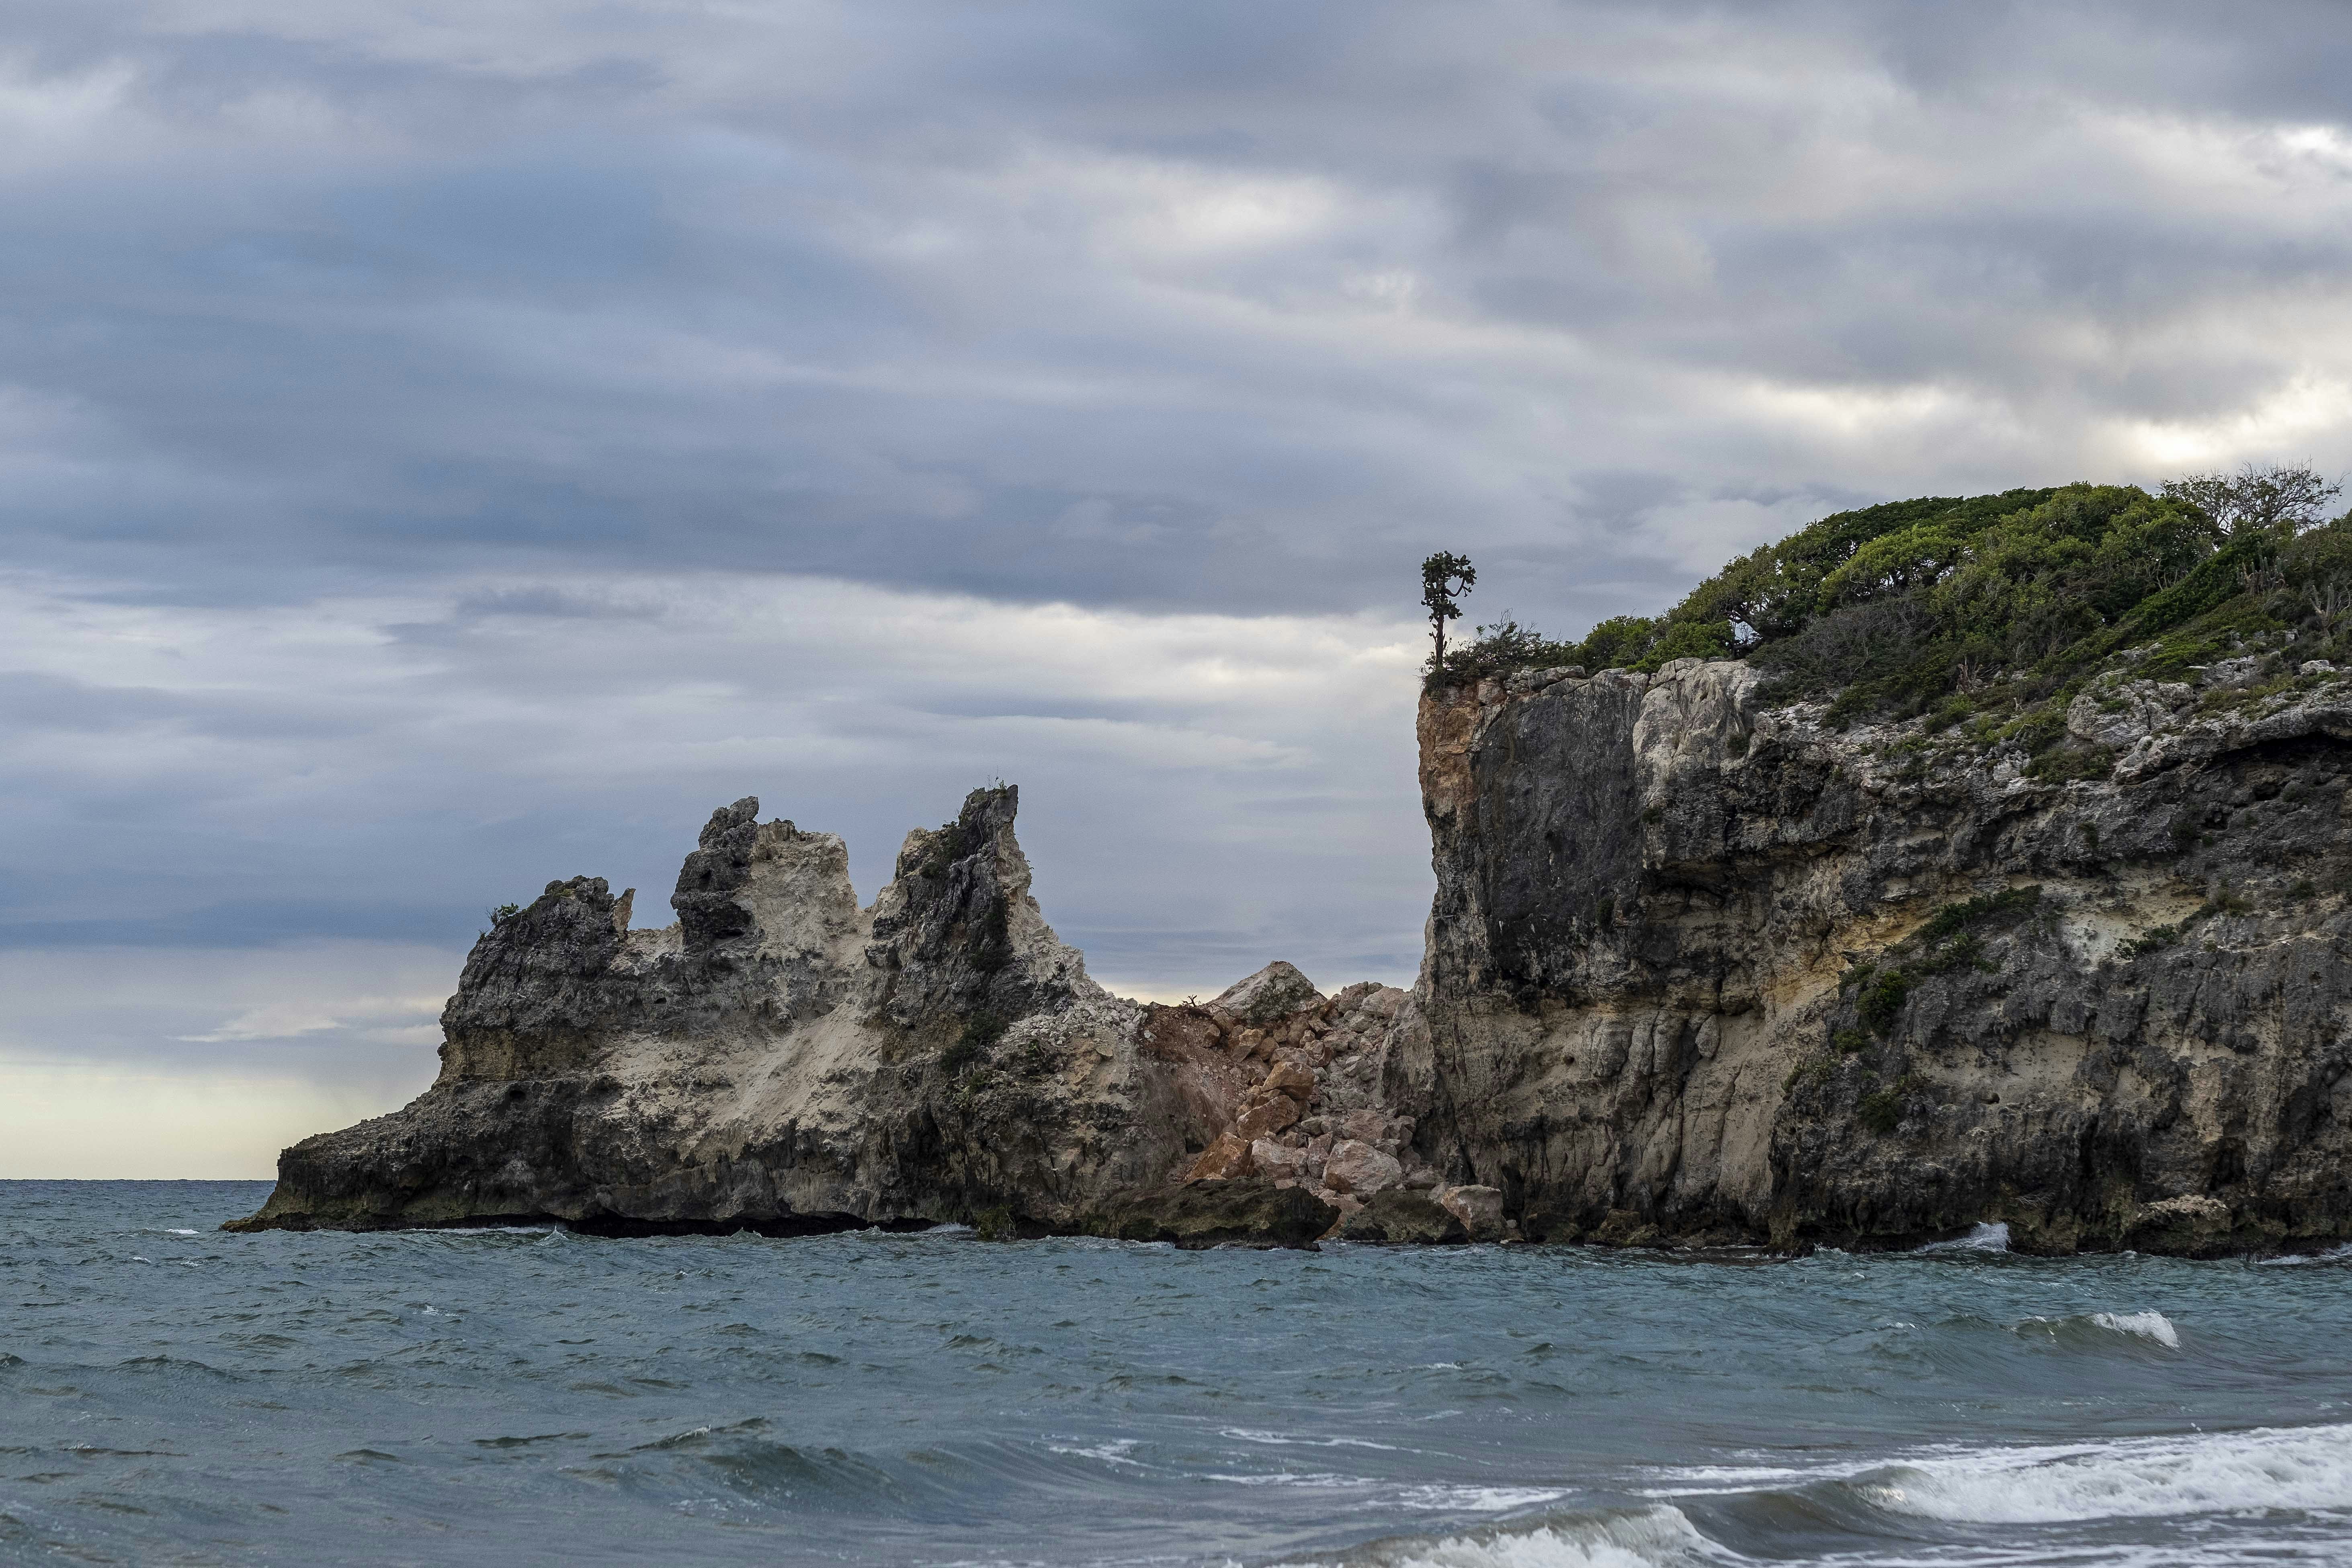 The collapsed rubble of what was once a natural sea arch known as Punta Ventana in Puerto Rico